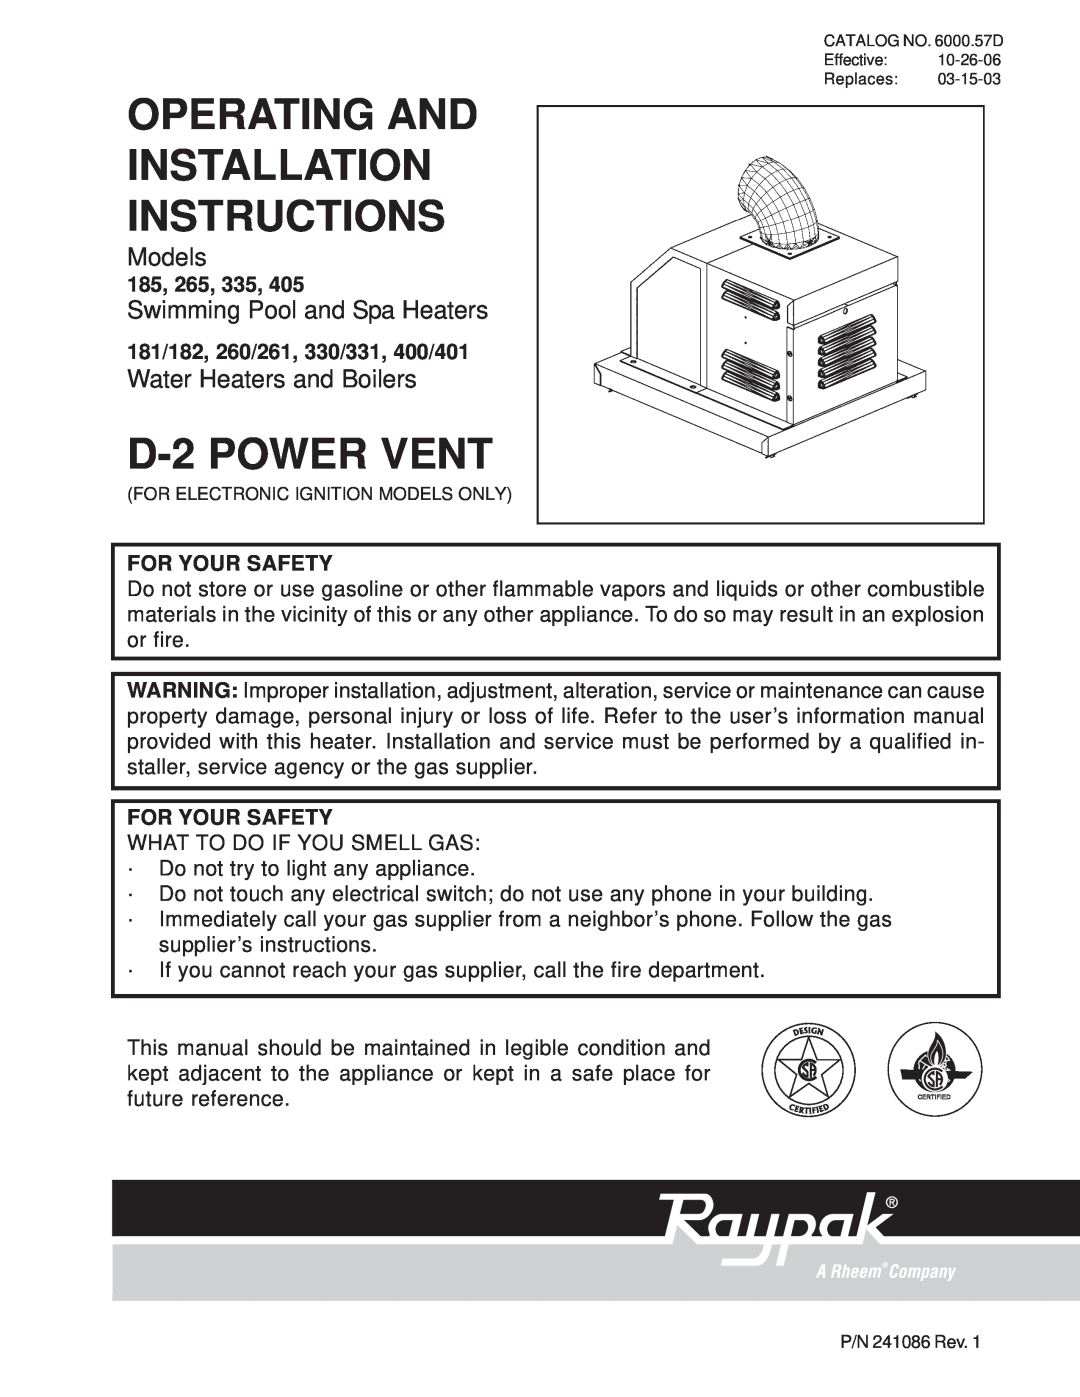 Raypak 335, 405 installation instructions 185, 181/182, 260/261, 330/331, 400/401, For Your Safety, D-2POWER VENT, Models 